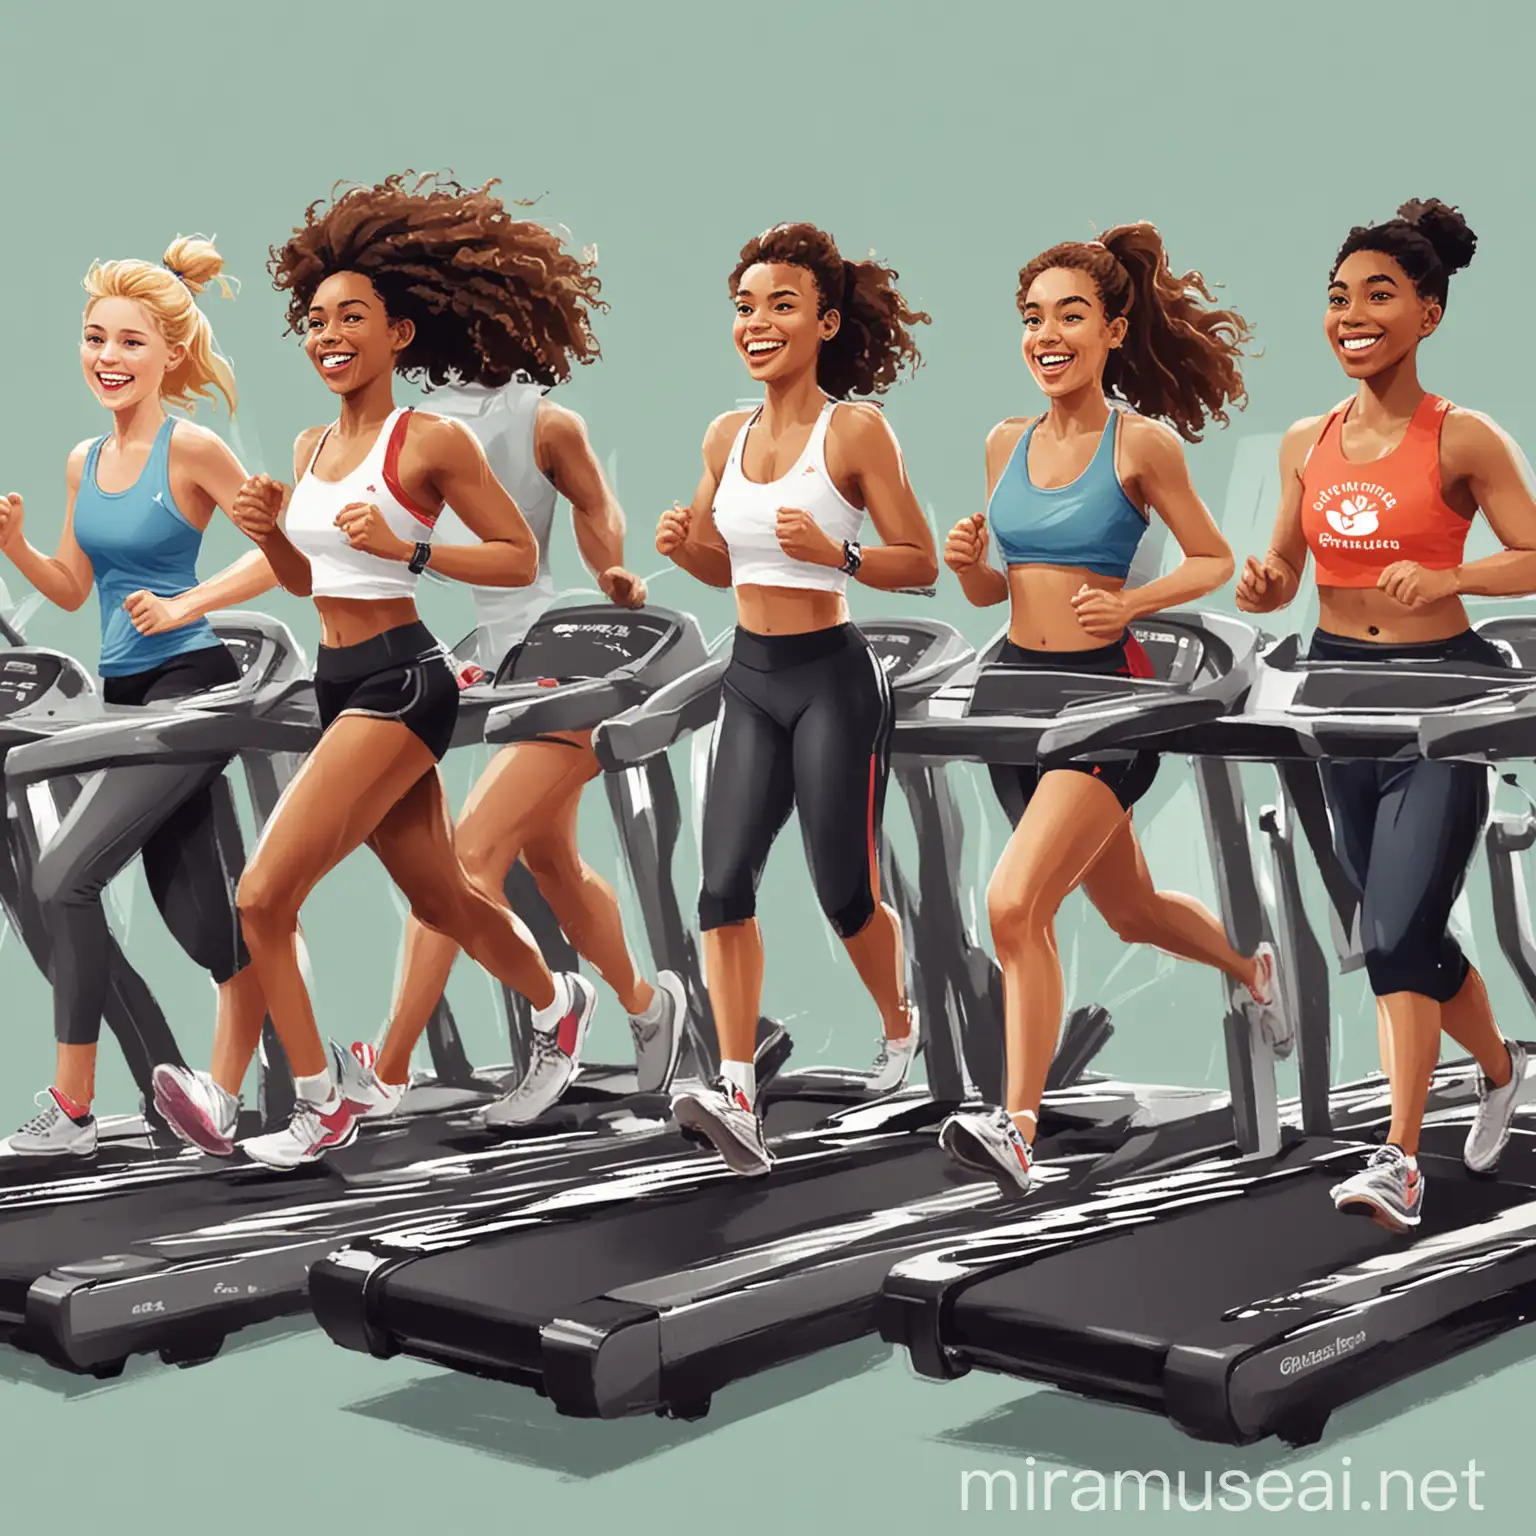 Diverse Group Smiling and Jogging on Treadmills with Brand Logo